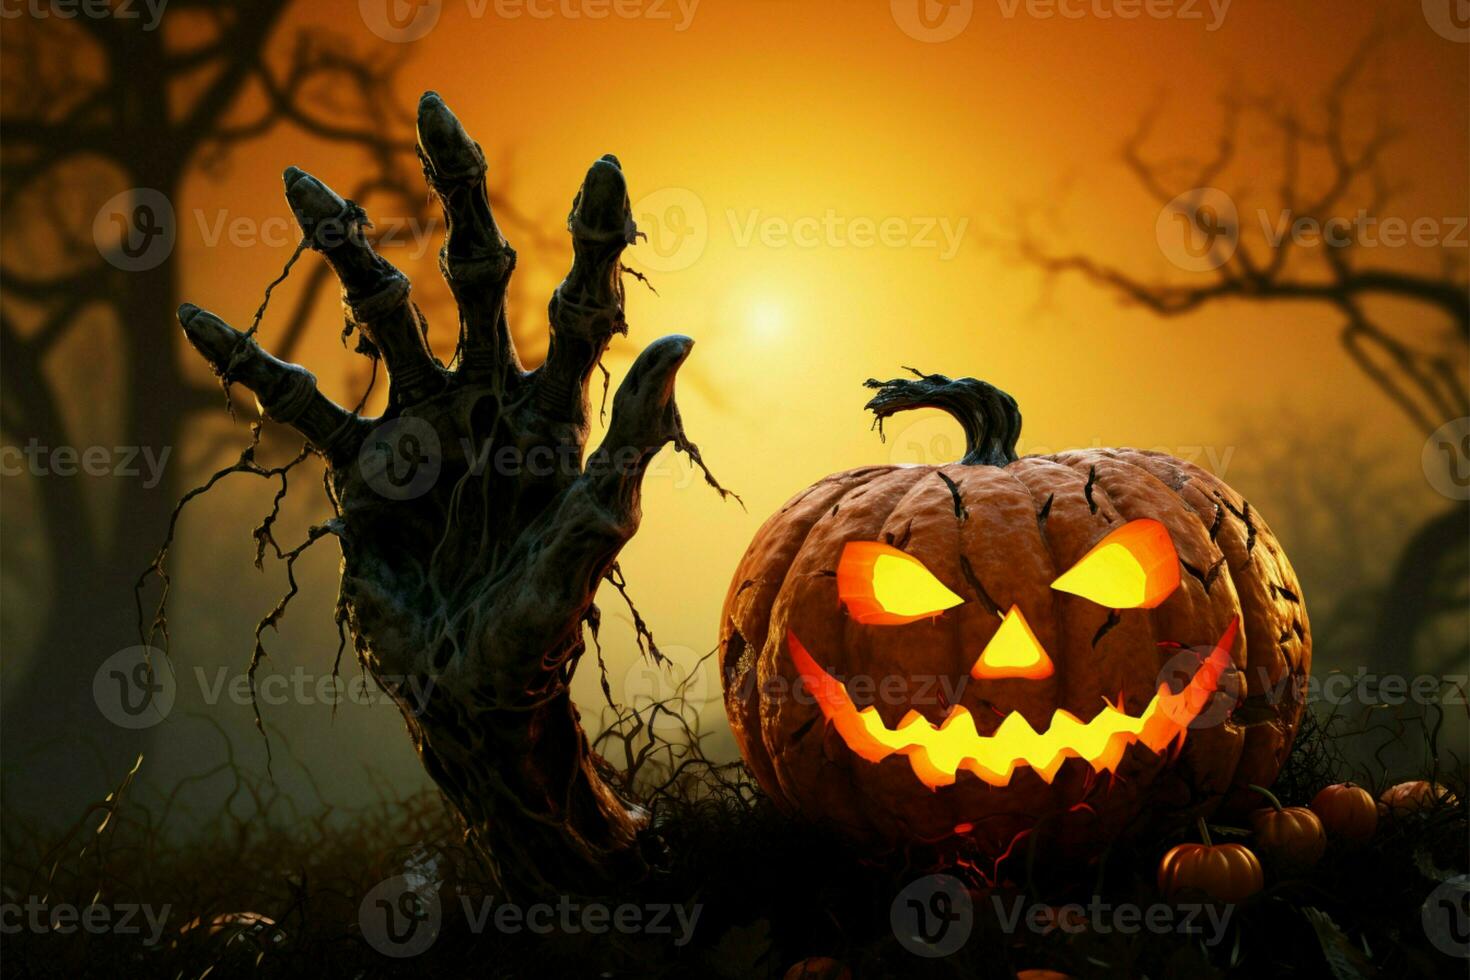 Zombie hand emerges from 3D rendered Halloween pumpkin in spooky setting AI Generated photo